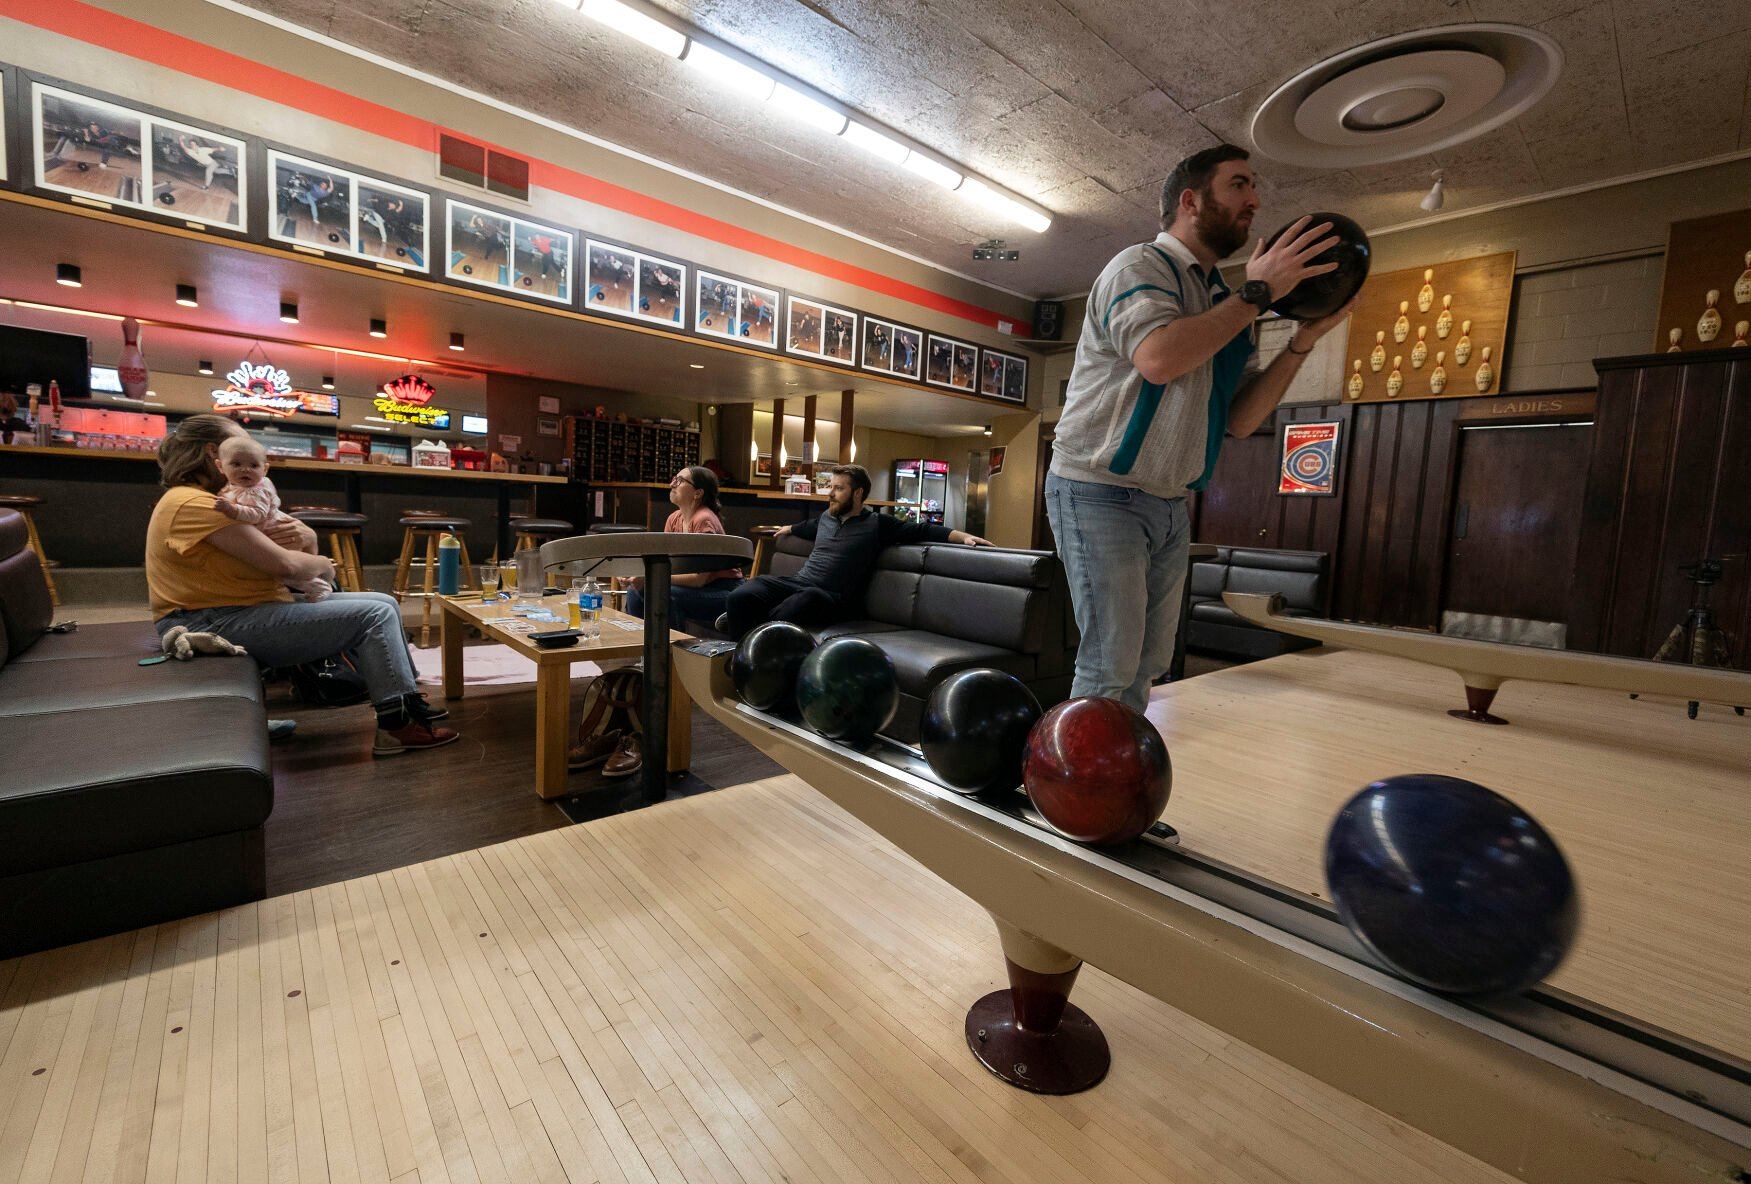 Jonny Carlson prepares to throw during an evening of bowling at Fischer Lanes in Dubuque on Thursday, May 4, 2023.    PHOTO CREDIT: Stephen Gassman
Telegraph Herald